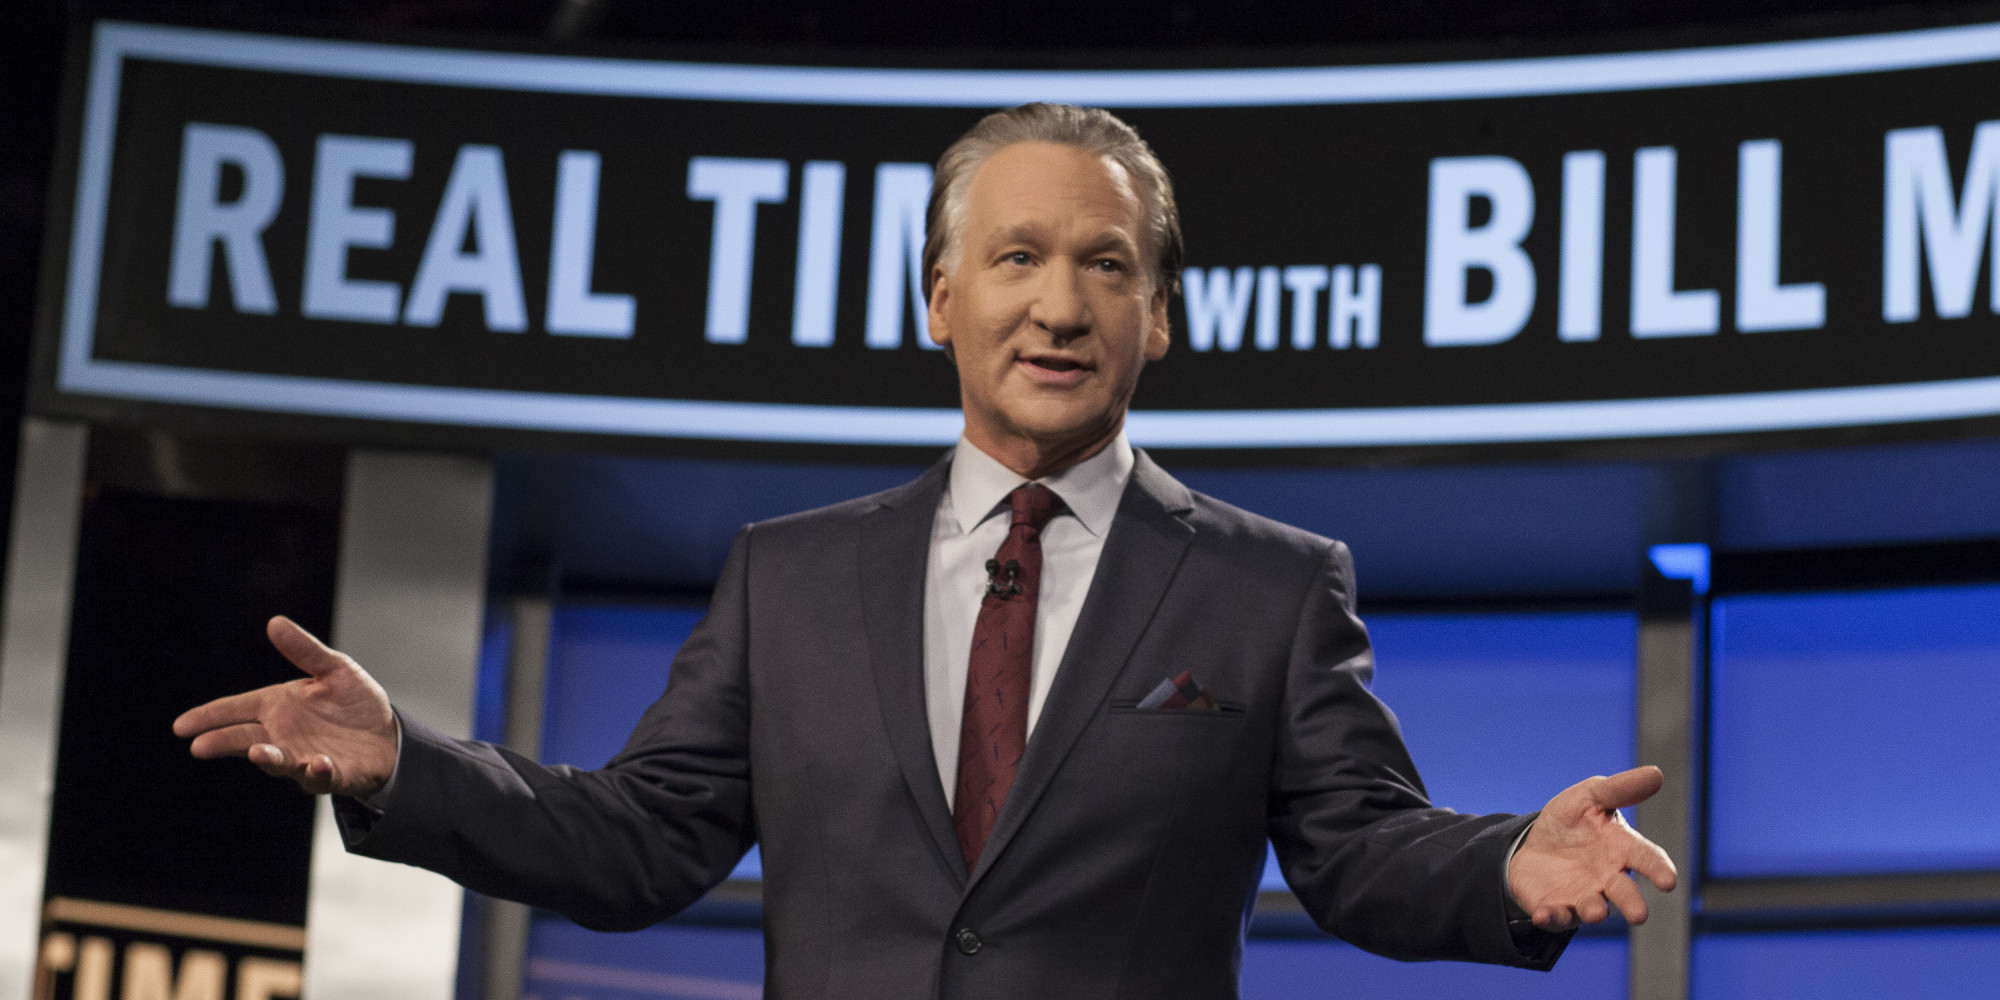 Bill Maher Blasts Network News, Says They Are All